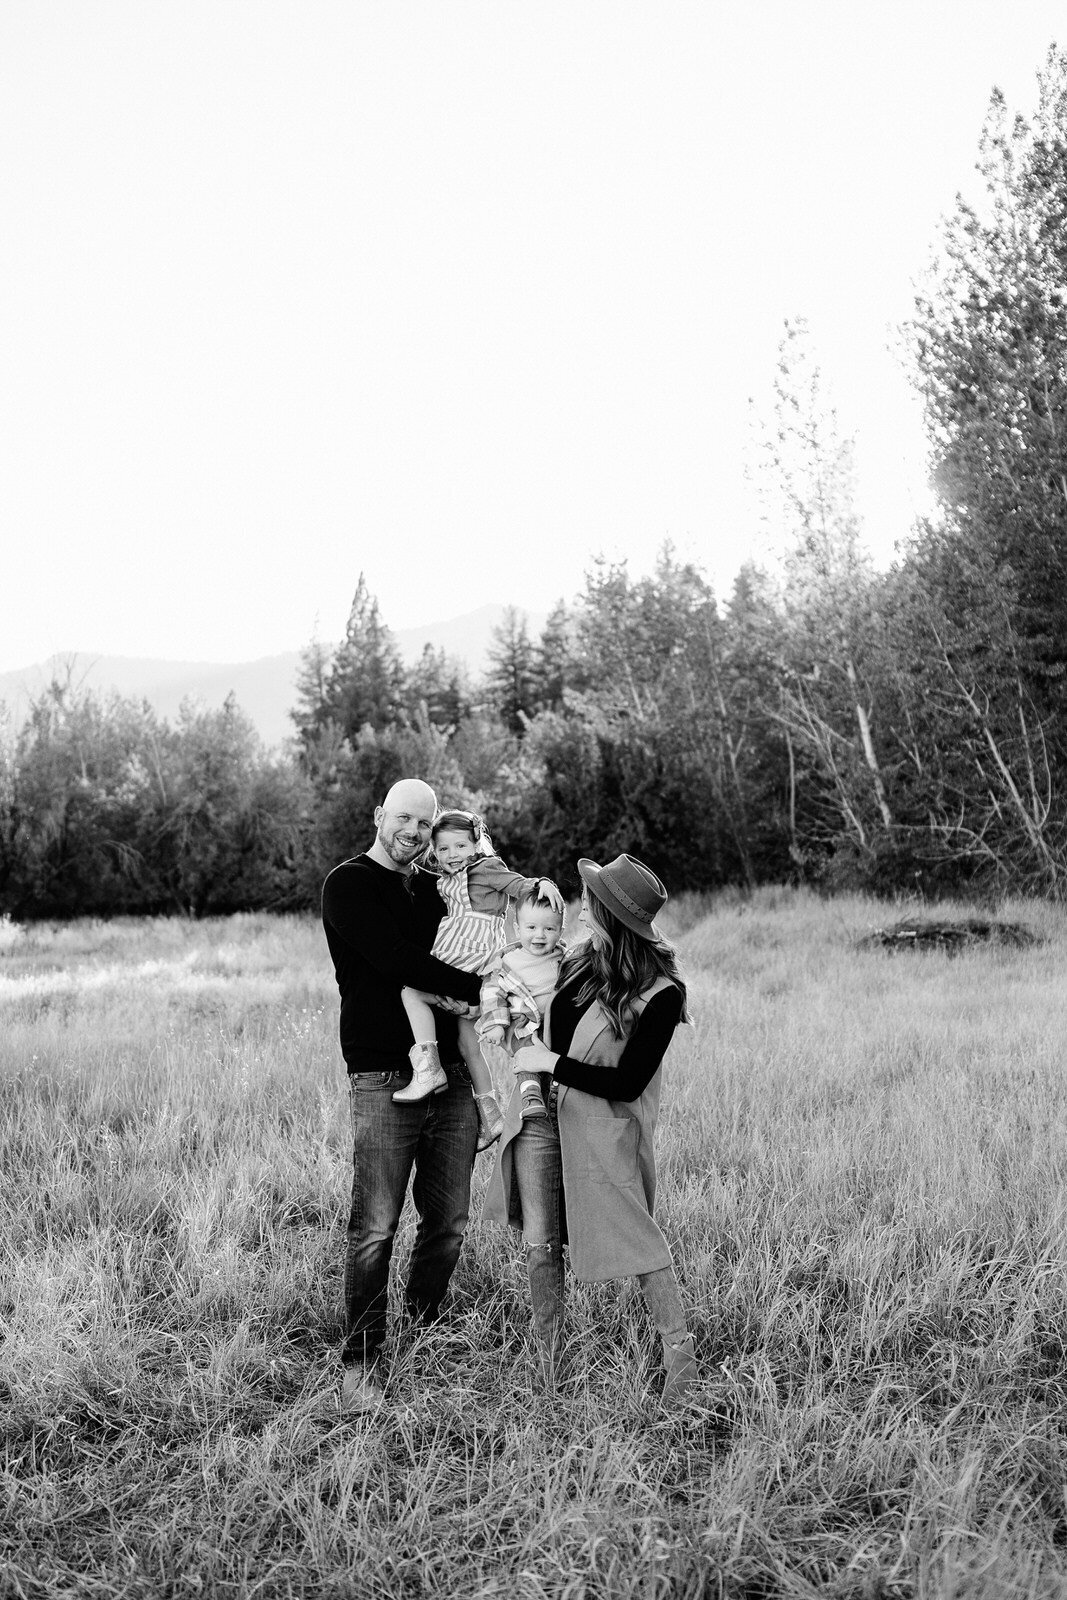 Parents and child in grayscale nature